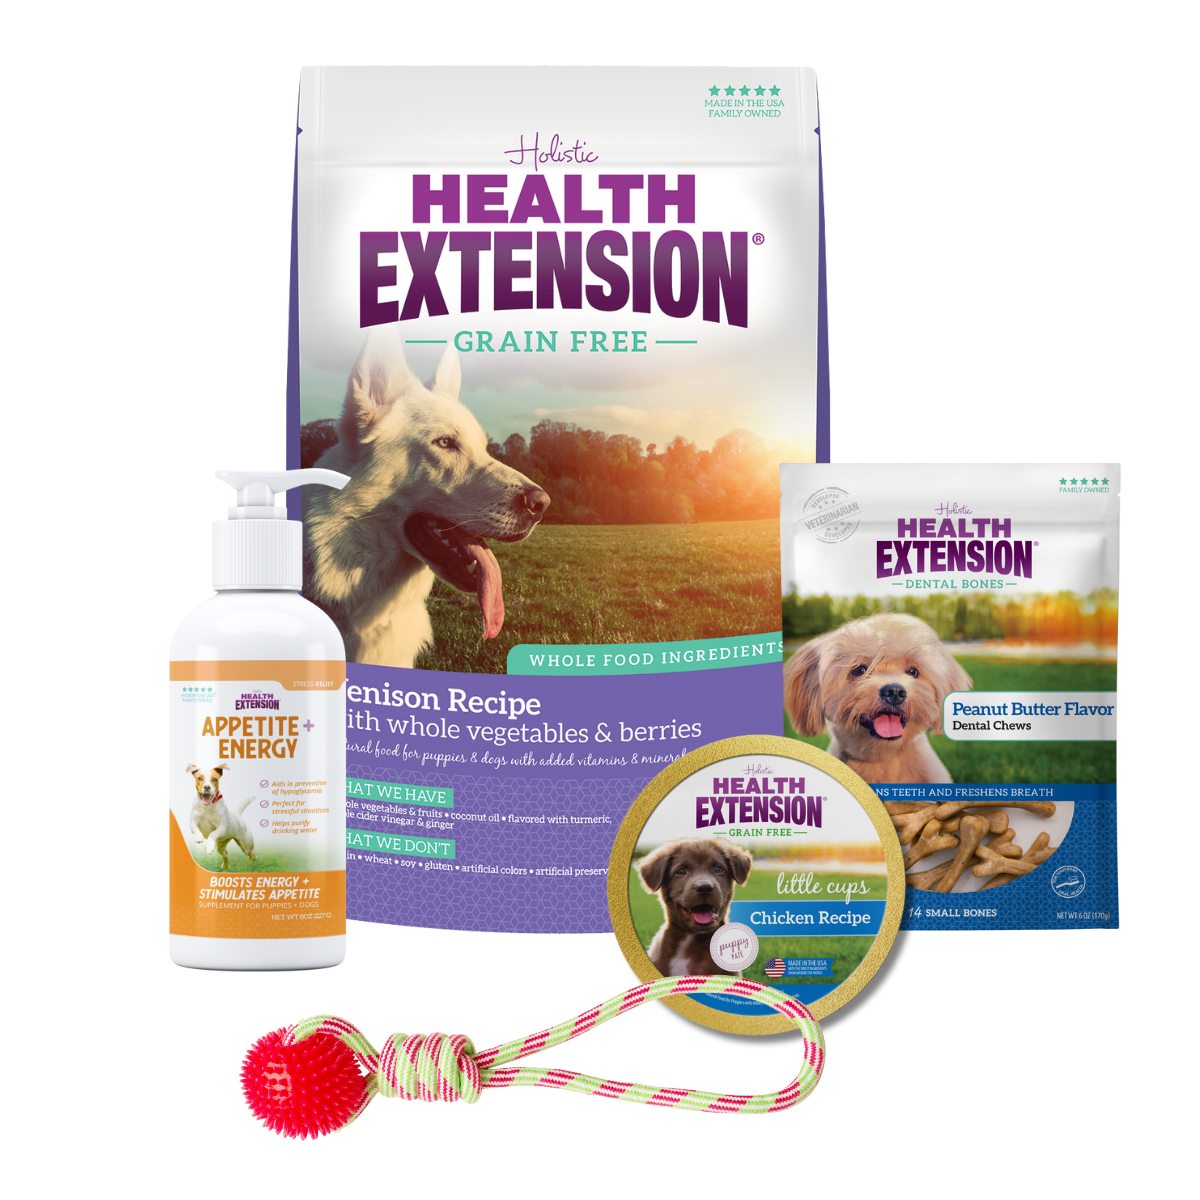 Complete Puppy Bundle: Health Extension Grain Free Venison Dry Dog Food and variety of other dog products, including food, treats, toys, and supplements.